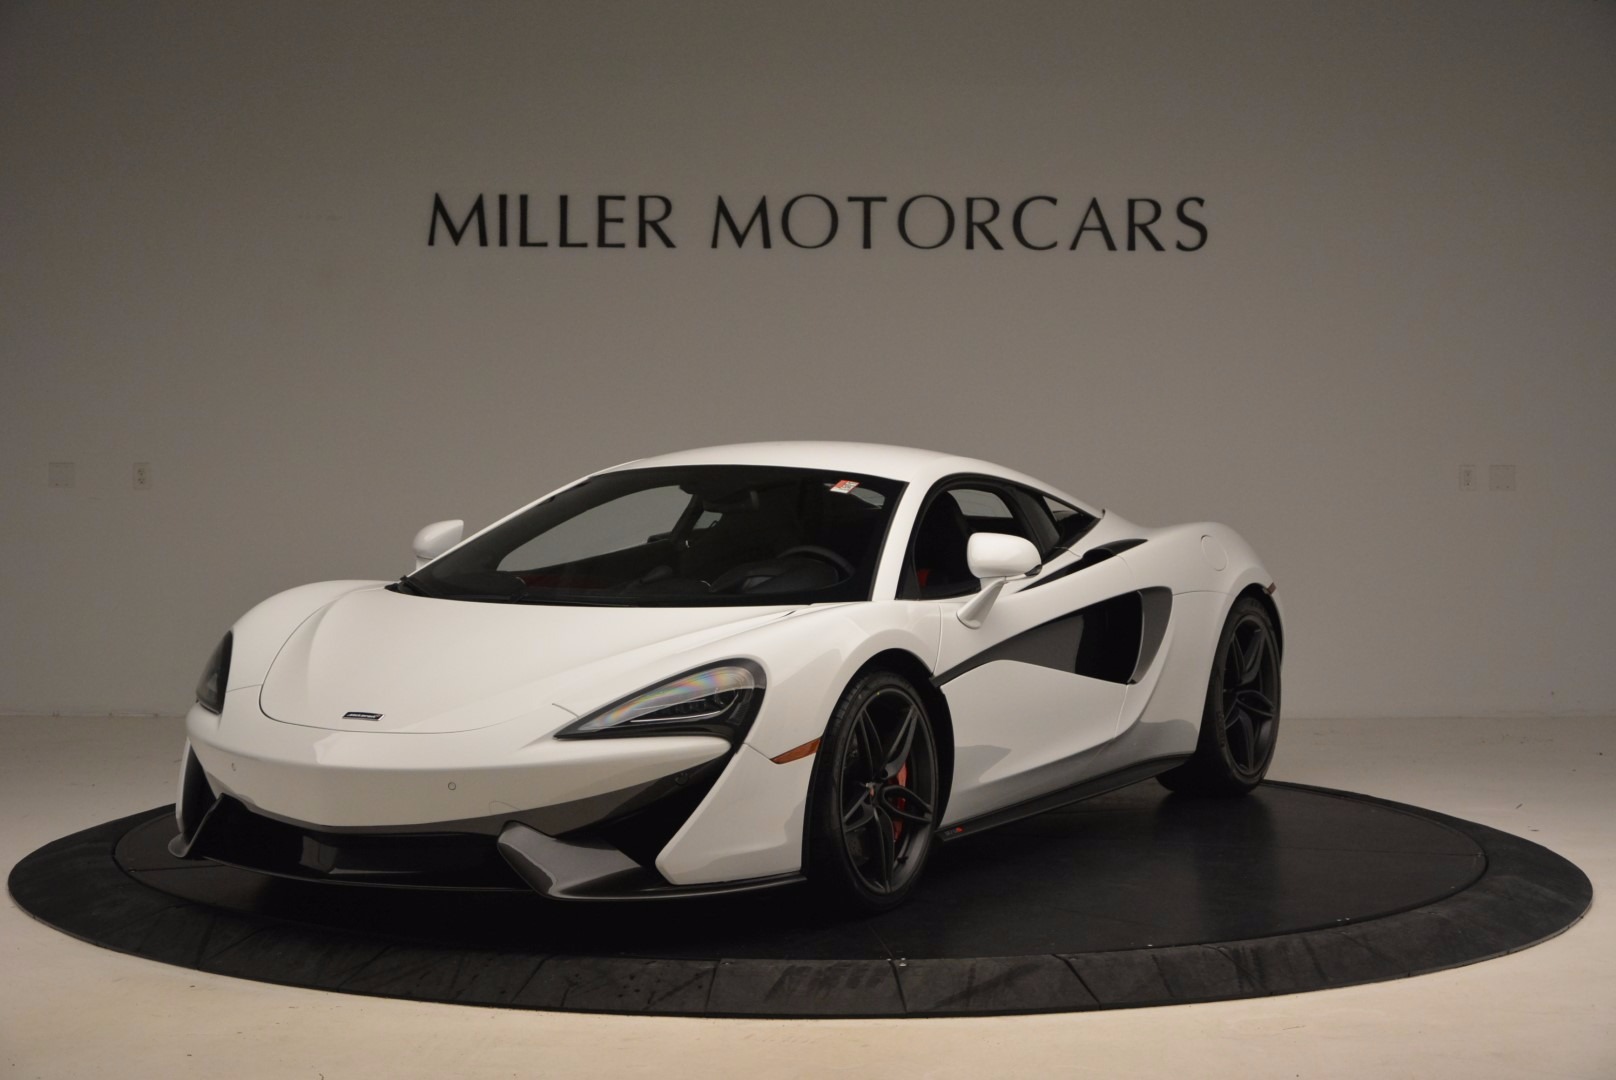 Used 2017 McLaren 570S for sale Sold at Alfa Romeo of Greenwich in Greenwich CT 06830 1